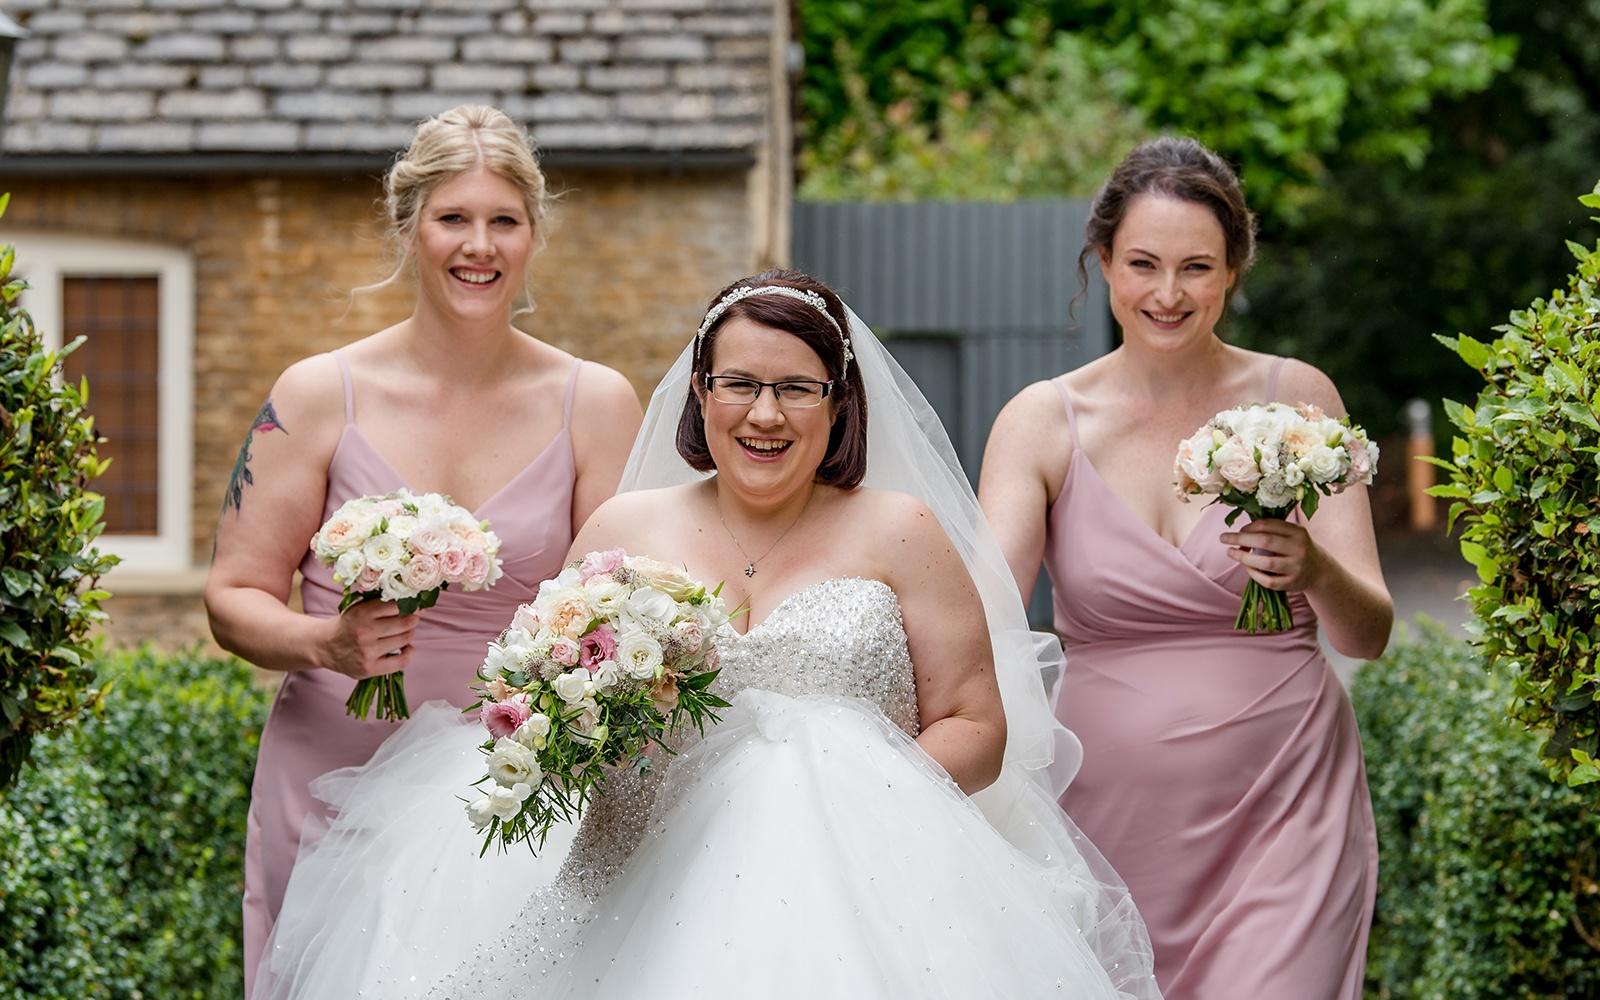 Capture Every Moment Real Wedding Photography Photographer duo Cirencester Hare and Hound Tetbury blush pink bridesmaid dresses